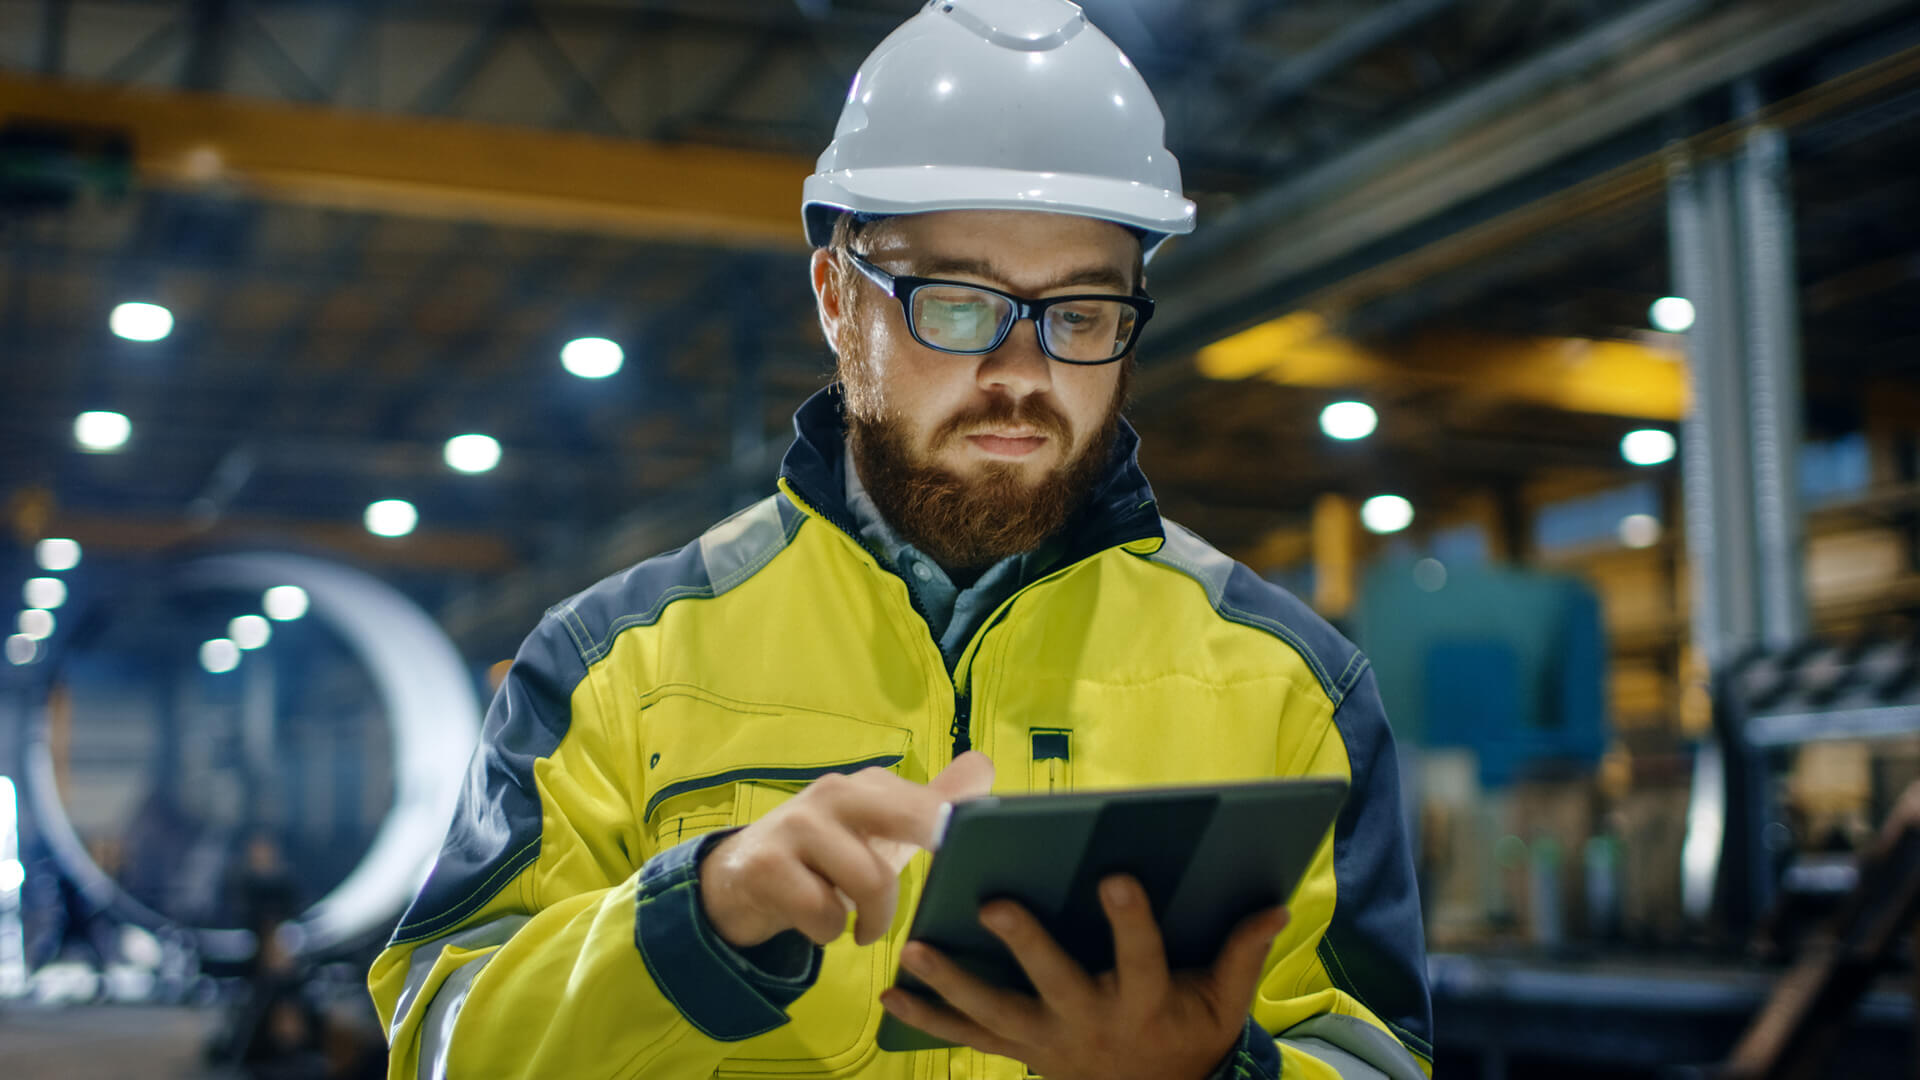 Industrial Engineer in Hard Hat Wearing Safety Jacket Uses Touchscreen Tablet Computer